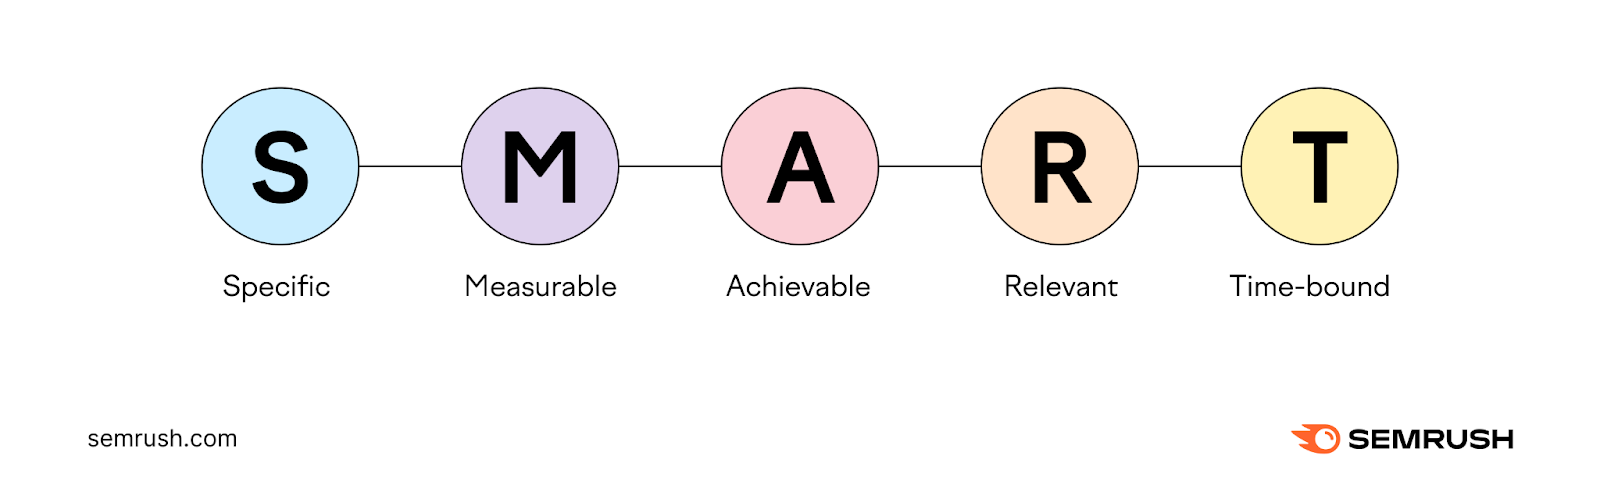 SMART objectives meaning "specific," "measurable," "achievable," "relevant," and "time-bound"